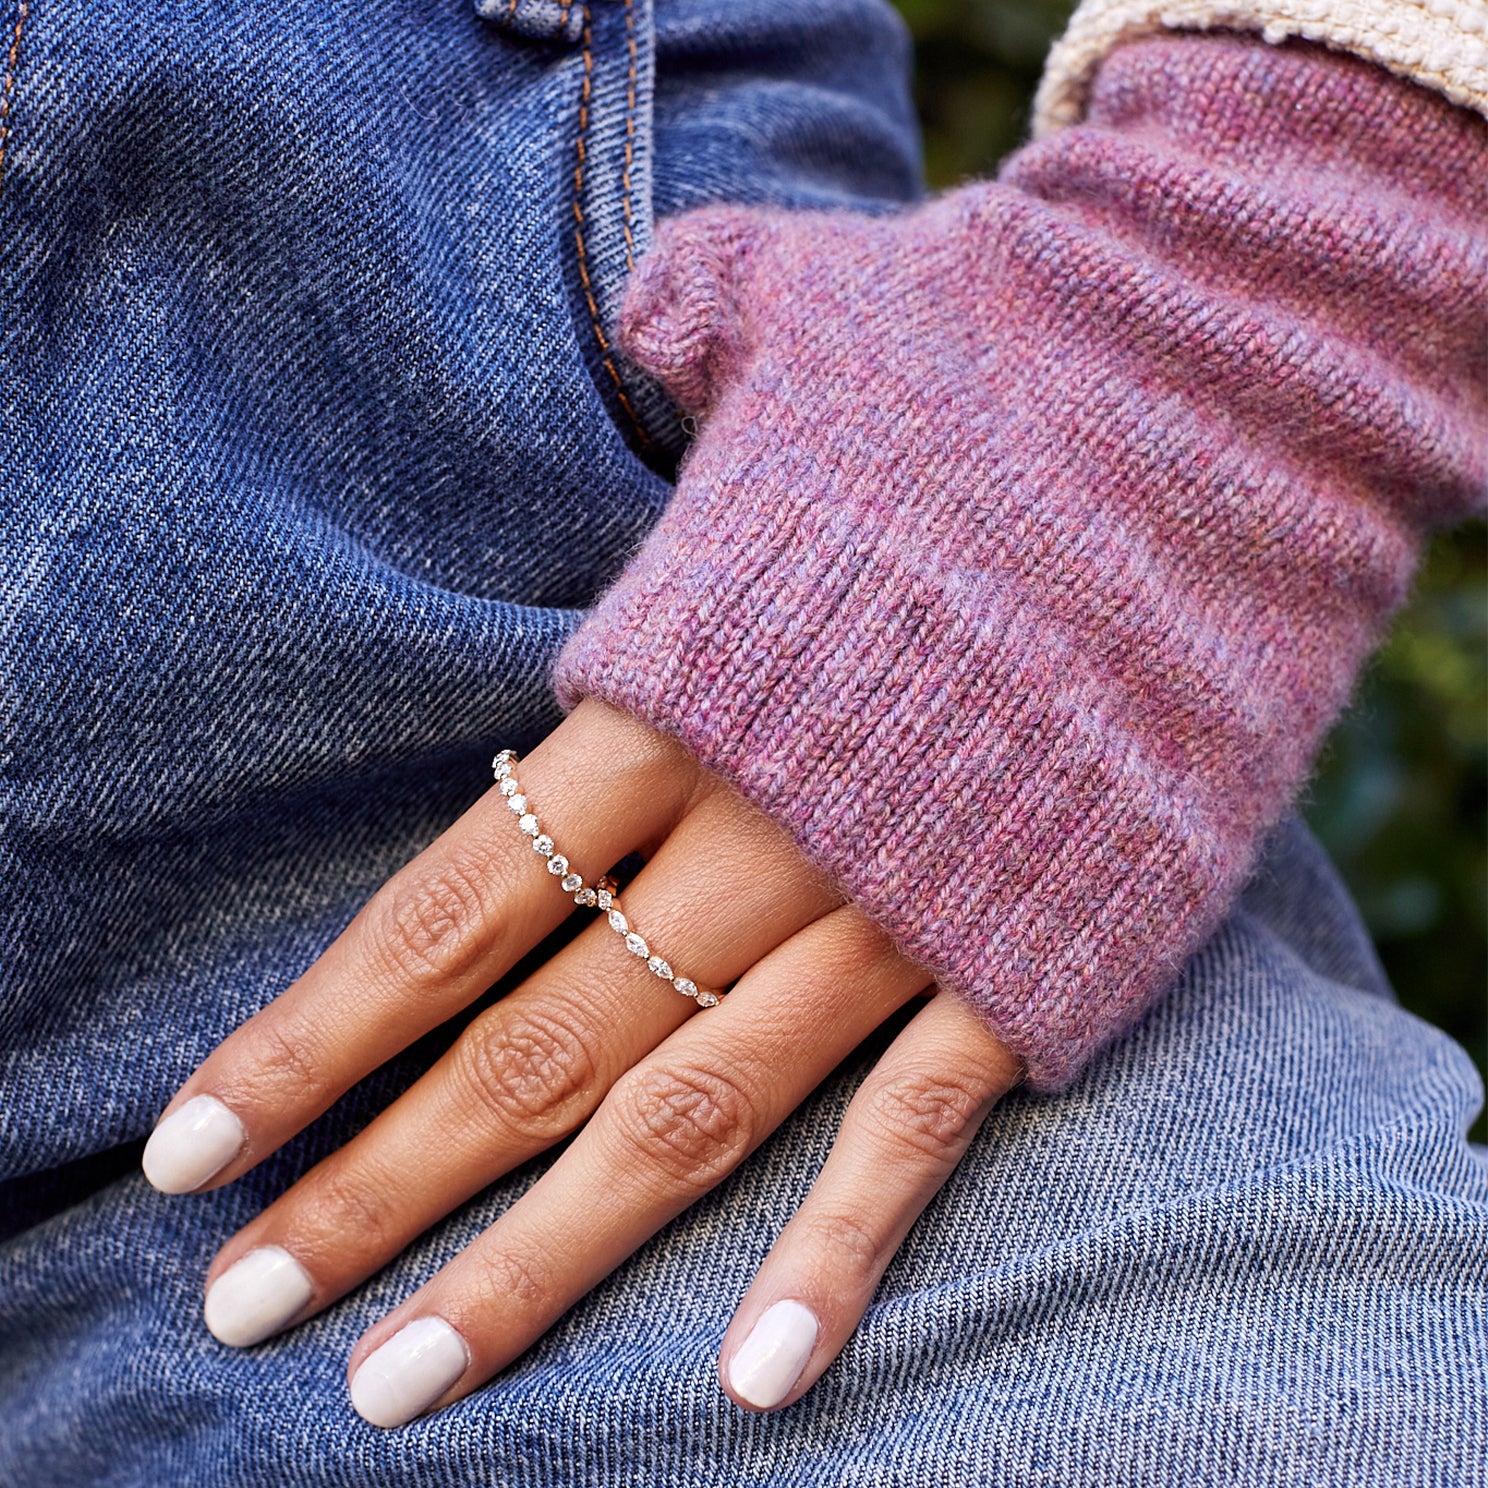 Mauve Cashmere Wrist Warmer styled on wrist of model with diamond rings styled on fingers